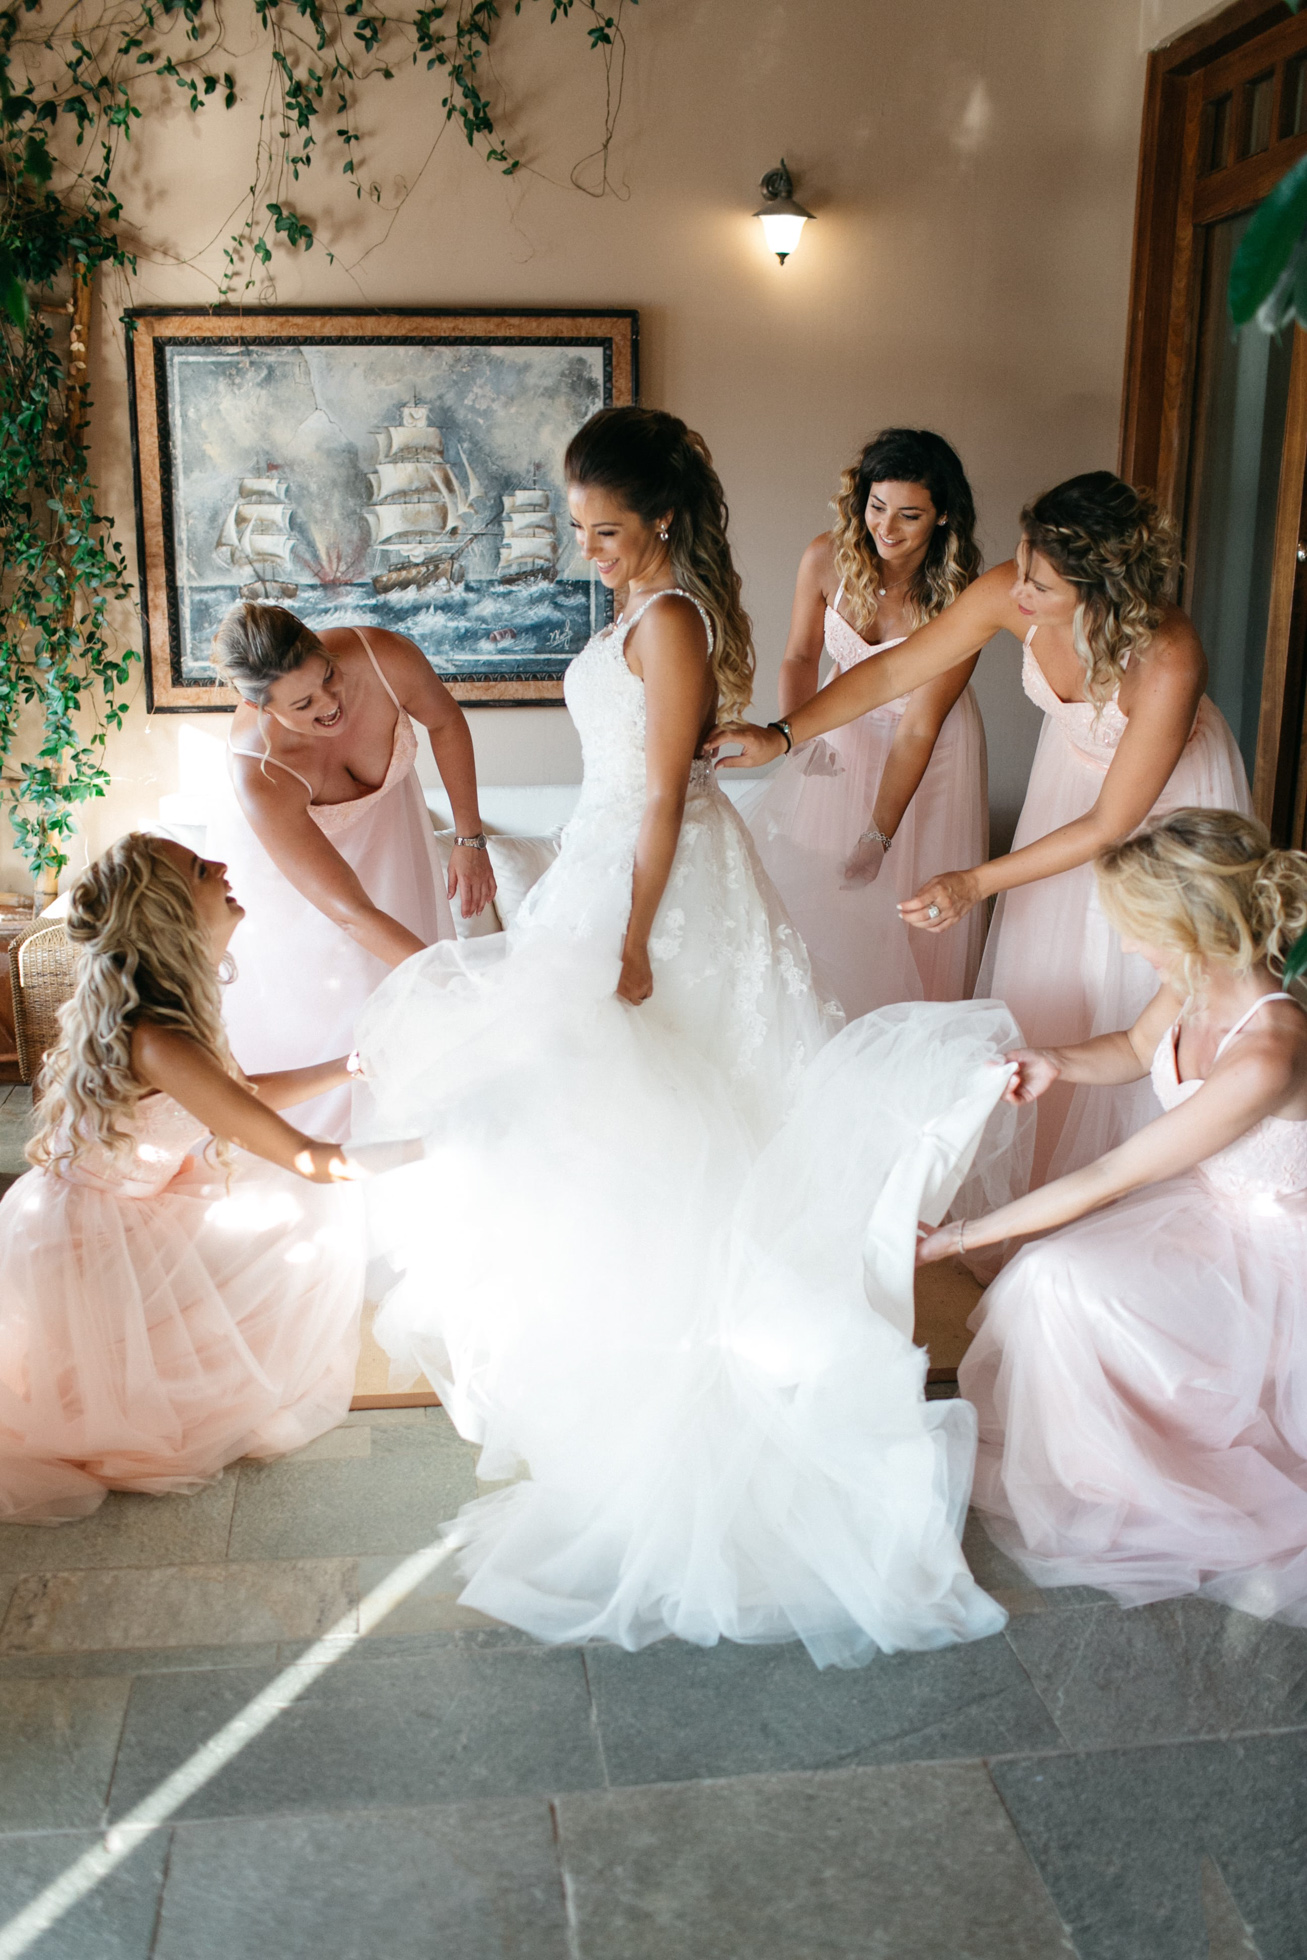 Bride with her bridesmaids during wedding preparations in Chania Crete.